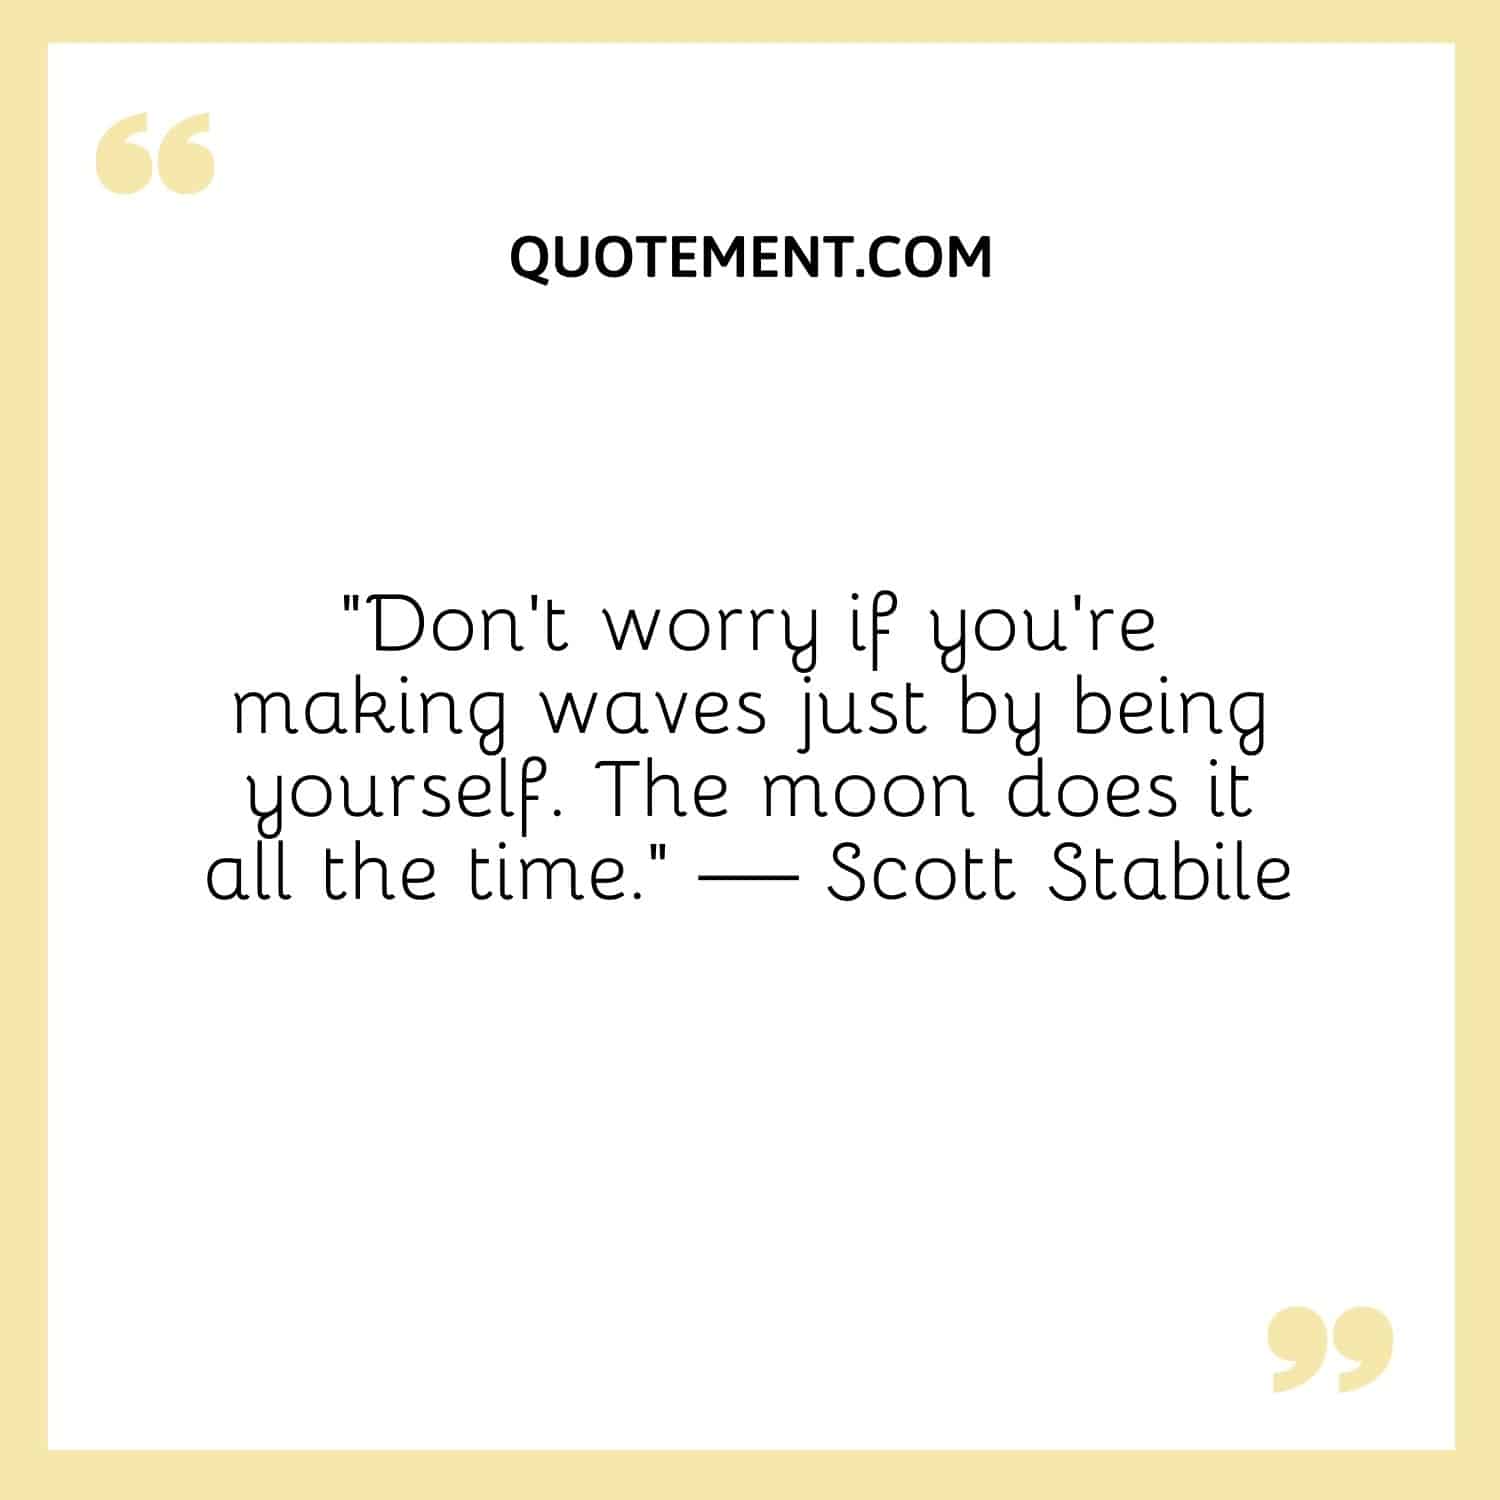 “Don’t worry if you’re making waves just by being yourself. The moon does it all the time.” — Scott Stabile